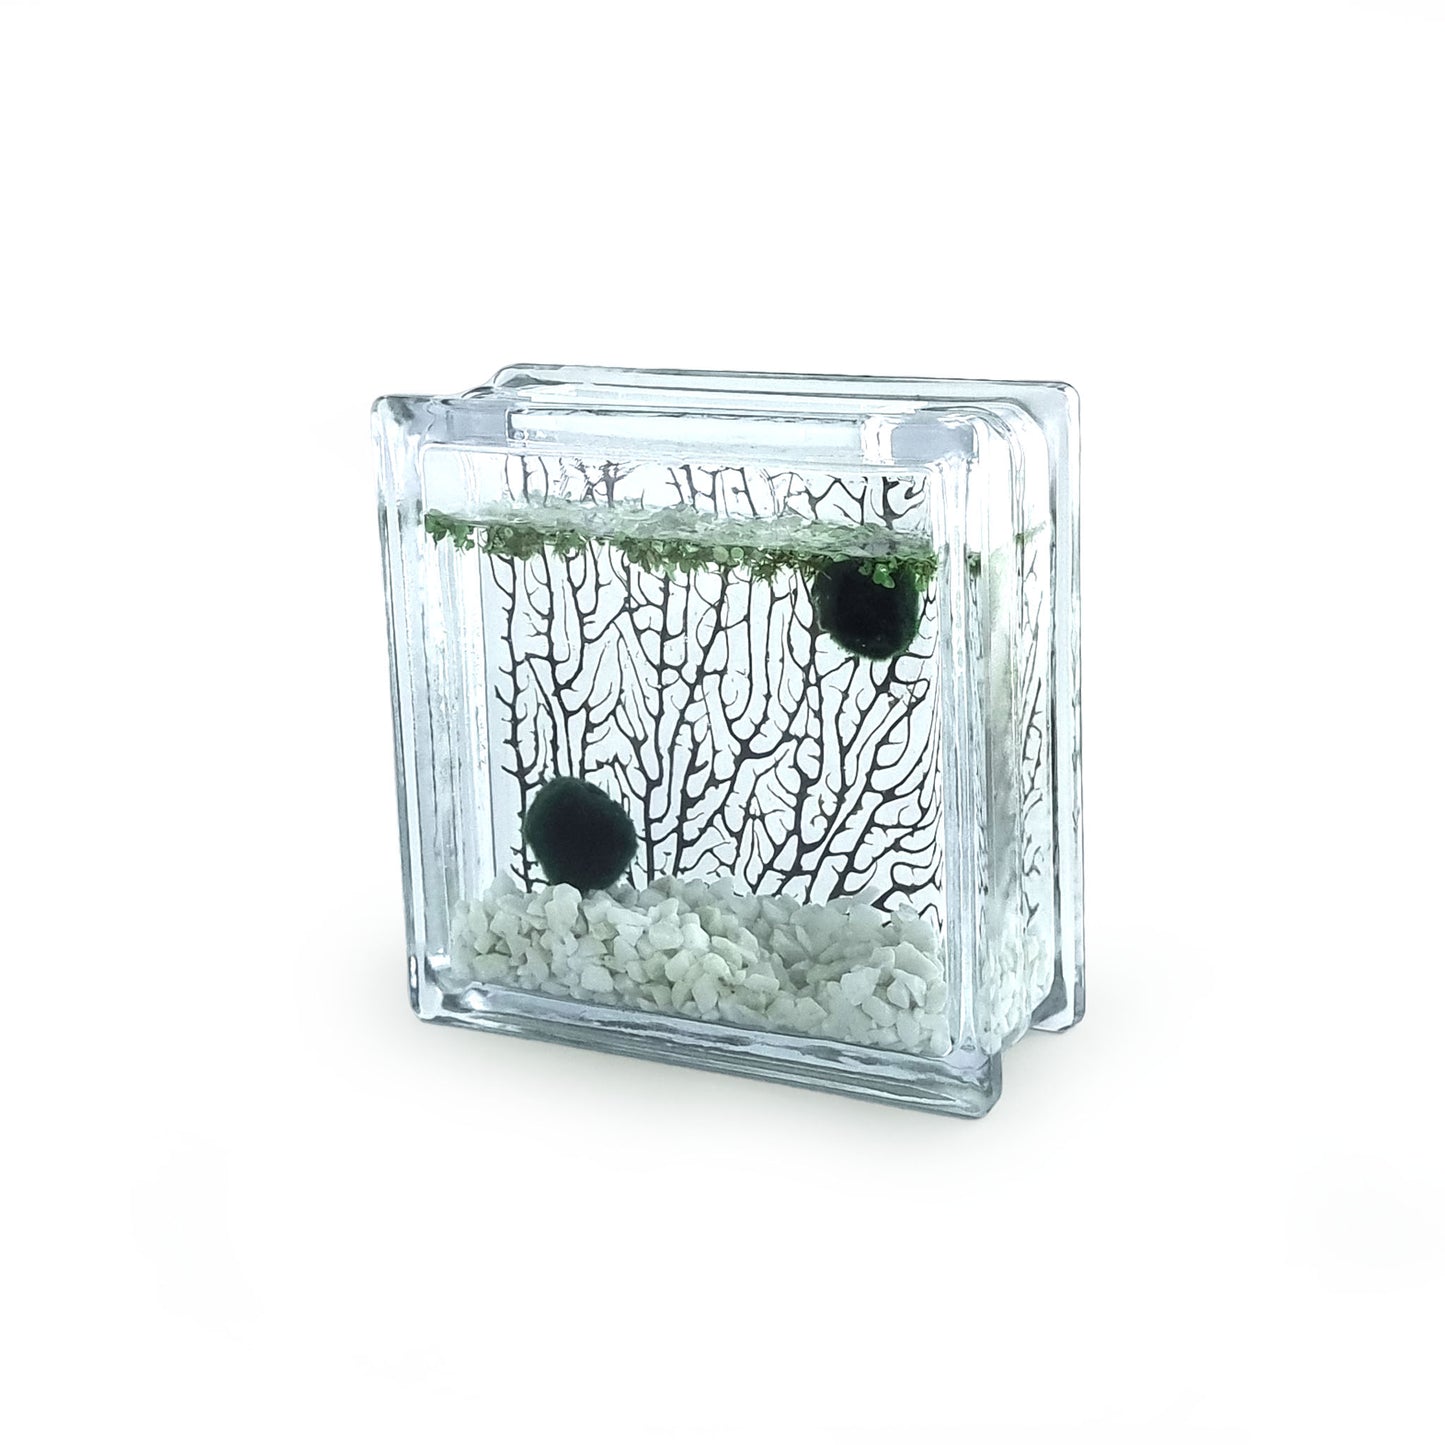 Marimo Moss Balls in glass brick with Gravel & dried Sea Fan Coral